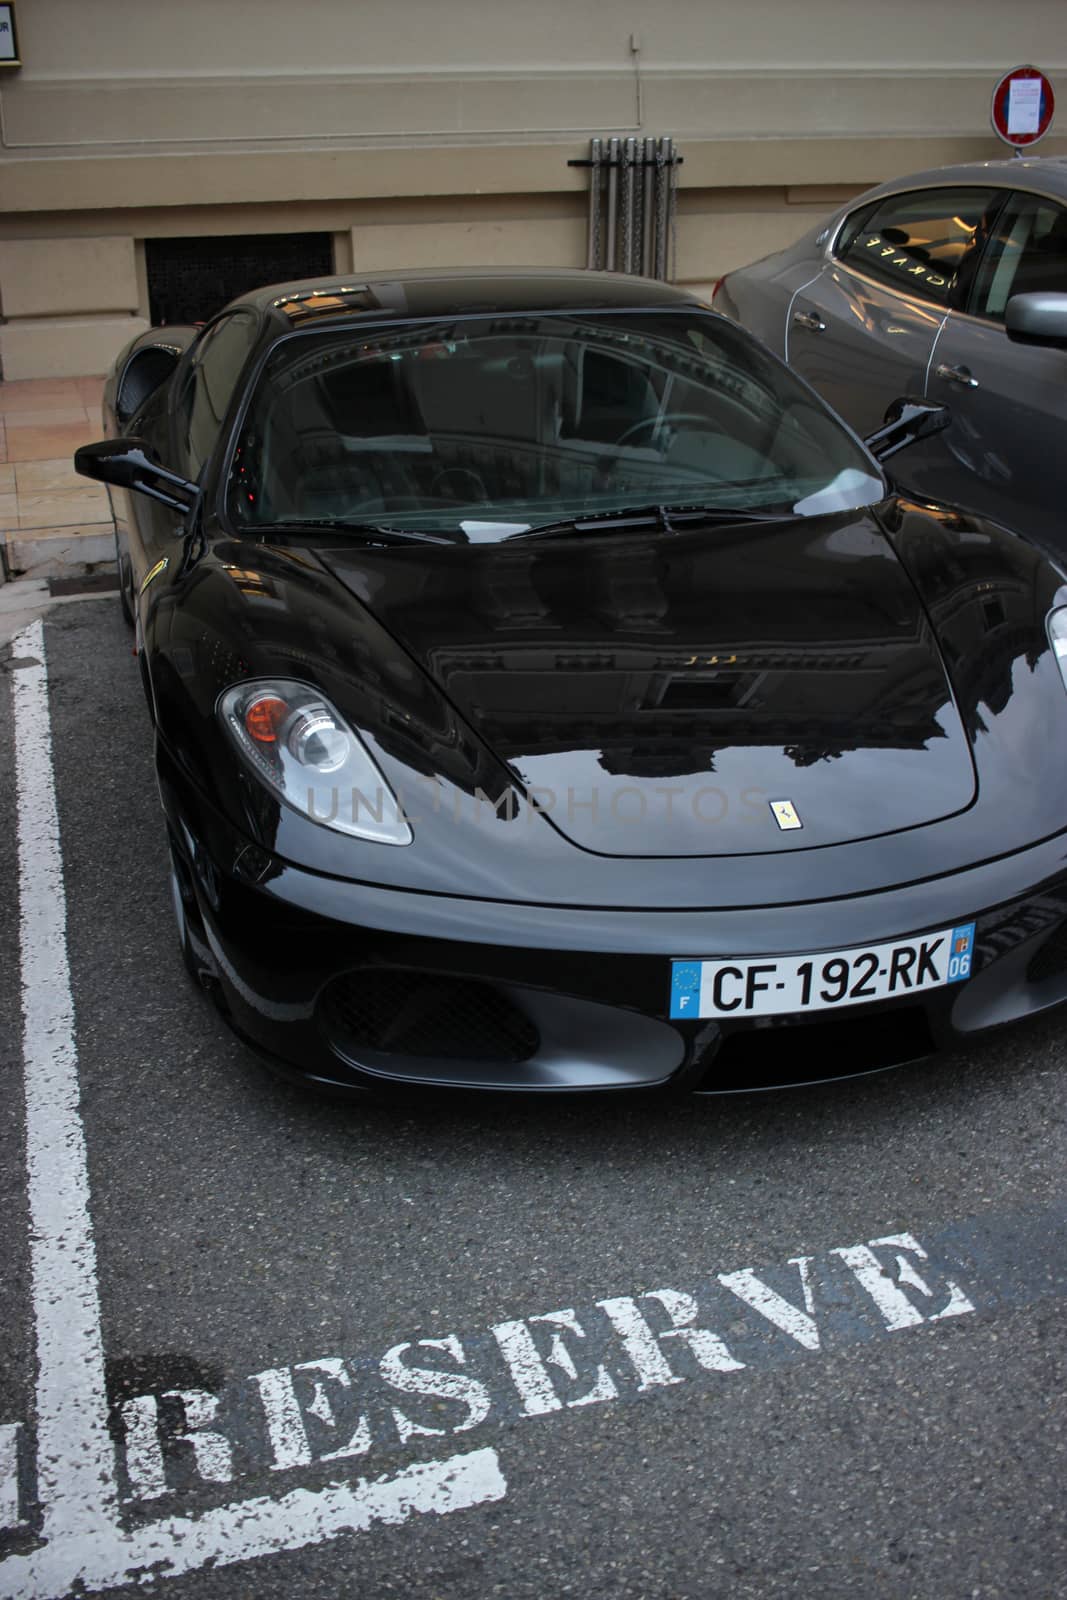 Monte-Carlo, Monaco - January 20 2016: Black Ferrari F430 Parked in a Reserved (Reserve in French) Parking Space in Monte-Carlo, Monaco